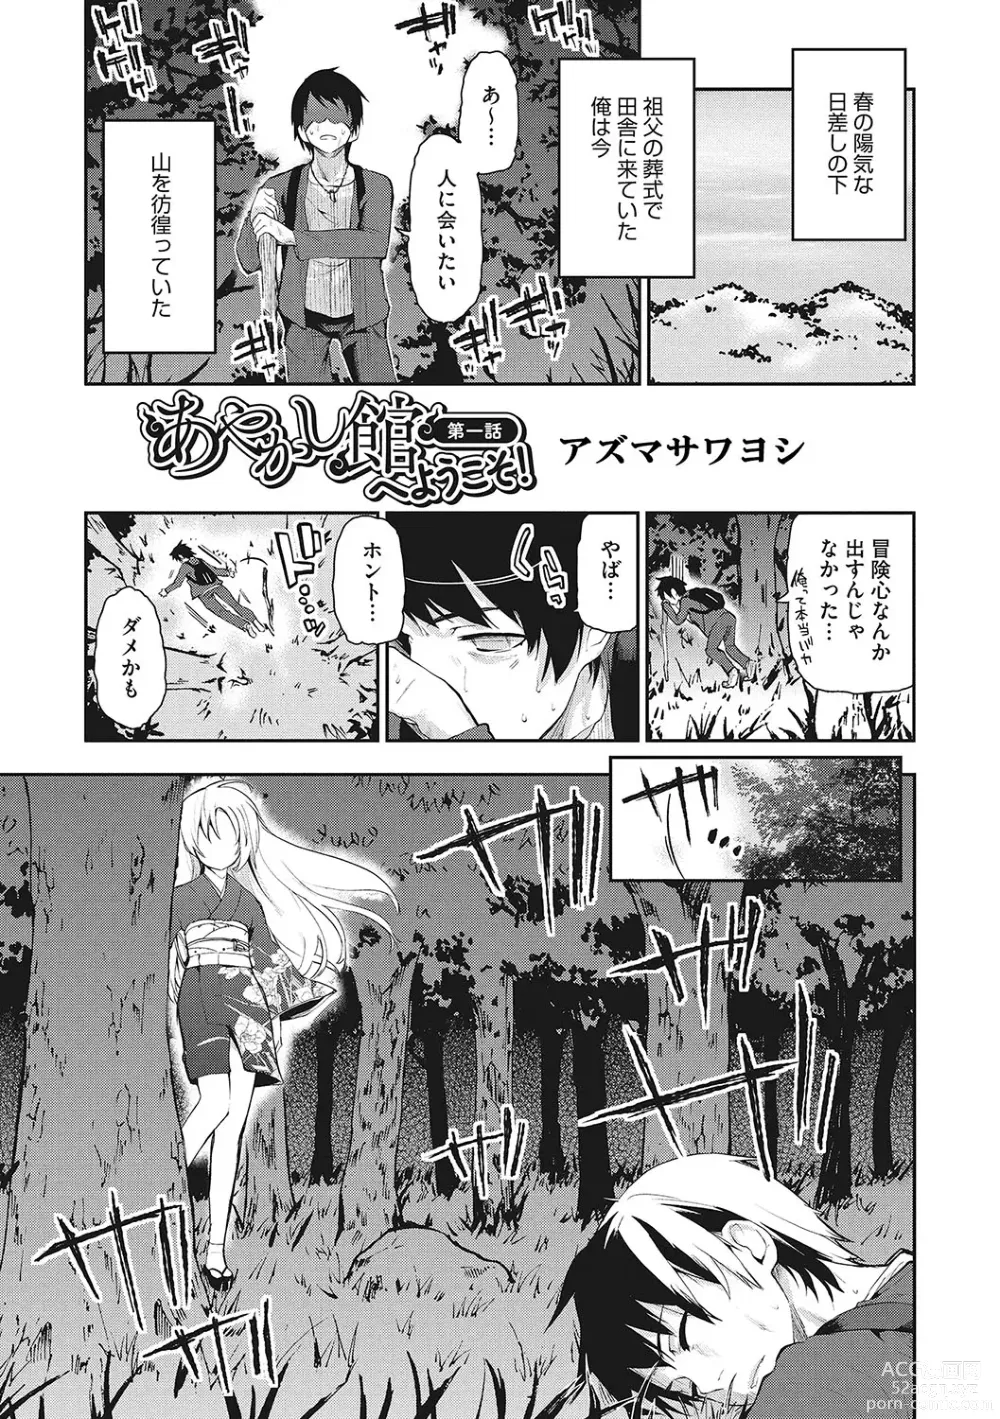 Page 10 of manga LQ -Little Queen- Vol. 54